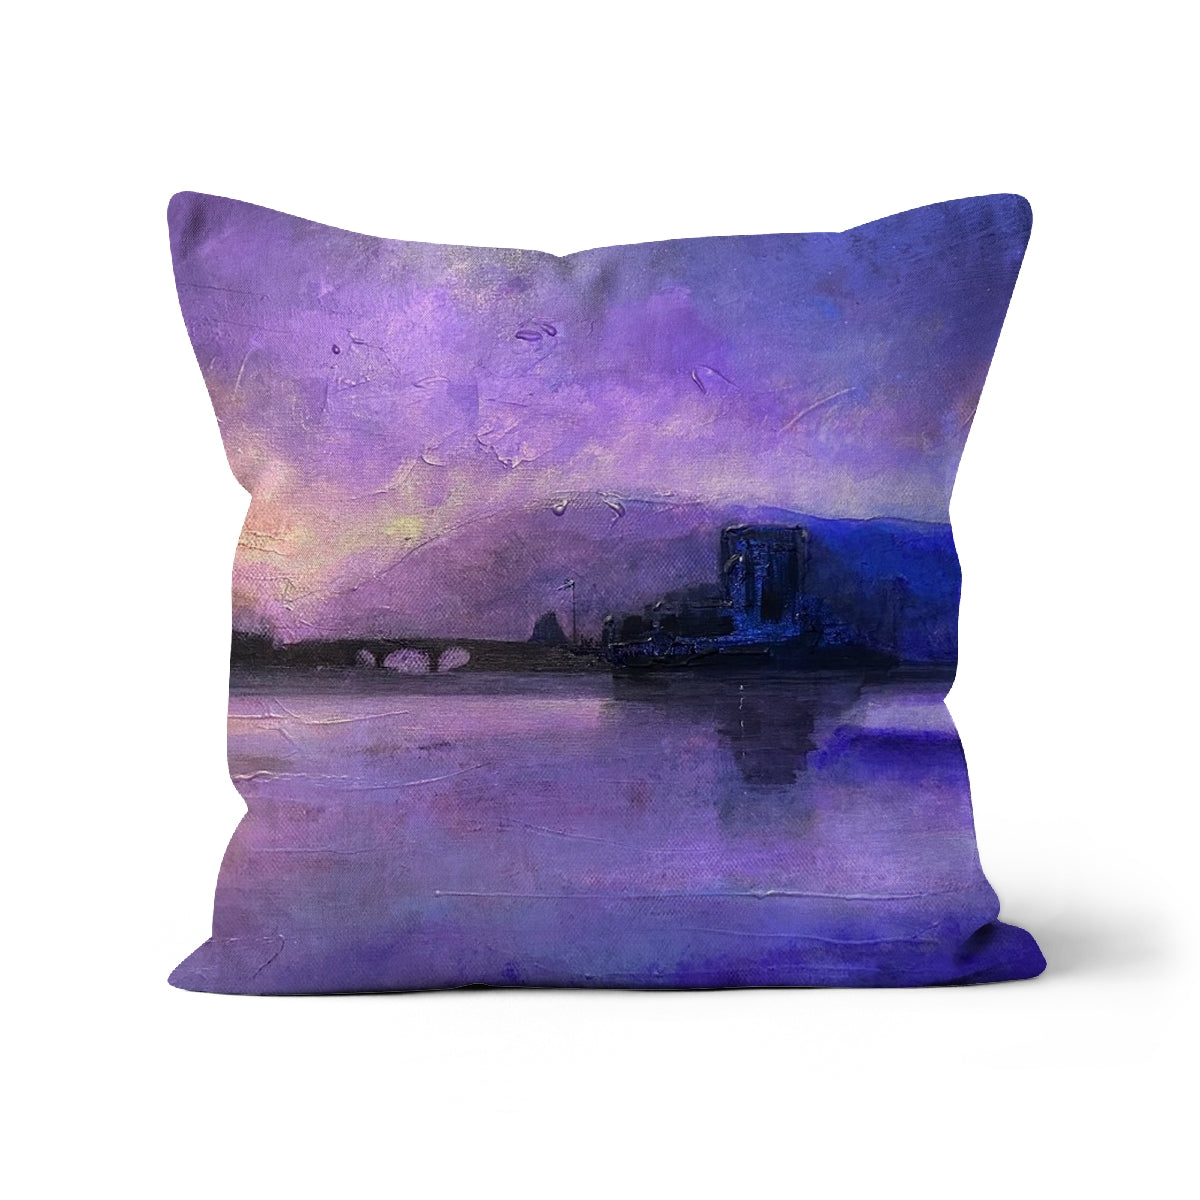 Eilean Donan Castle Moonset Art Gifts Cushion-Cushions-Historic & Iconic Scotland Art Gallery-Faux Suede-12"x12"-Paintings, Prints, Homeware, Art Gifts From Scotland By Scottish Artist Kevin Hunter